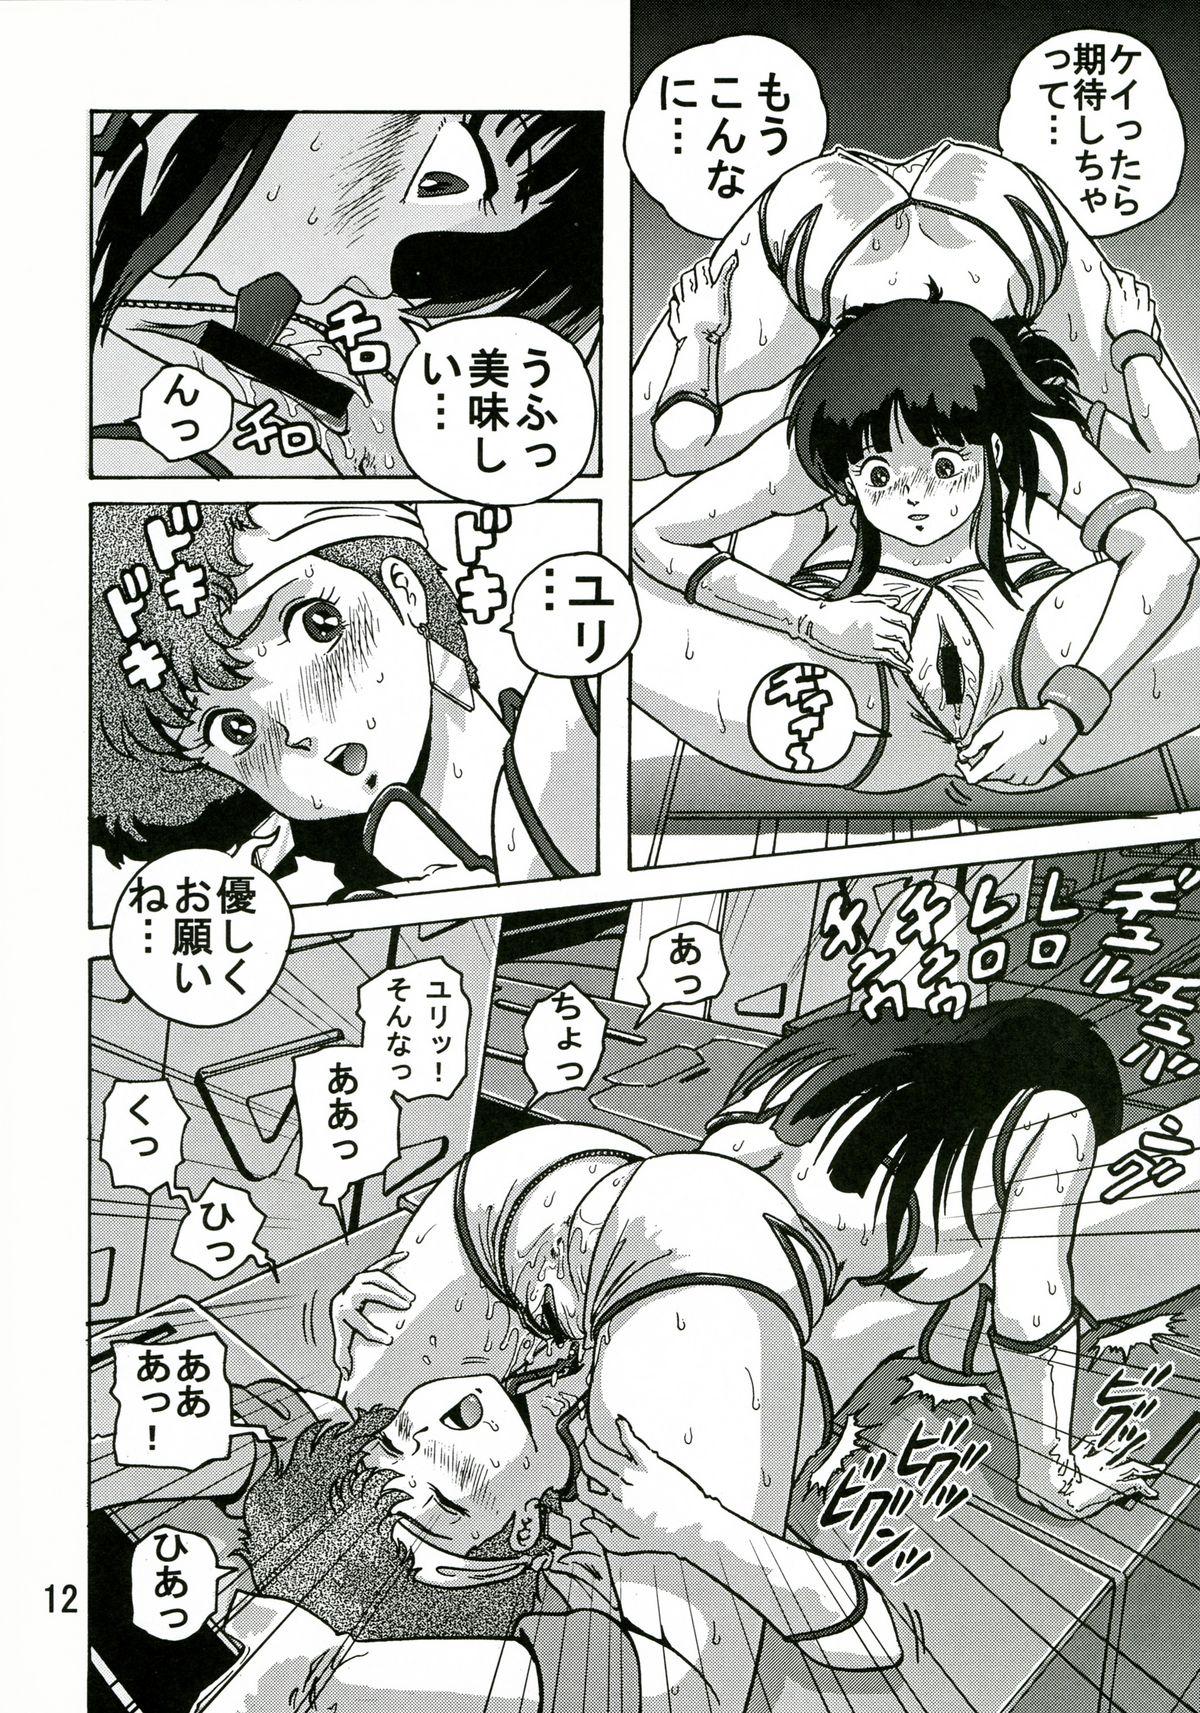 Jacking Off Love Angel 2 - Dirty pair Gay Medic - Page 11